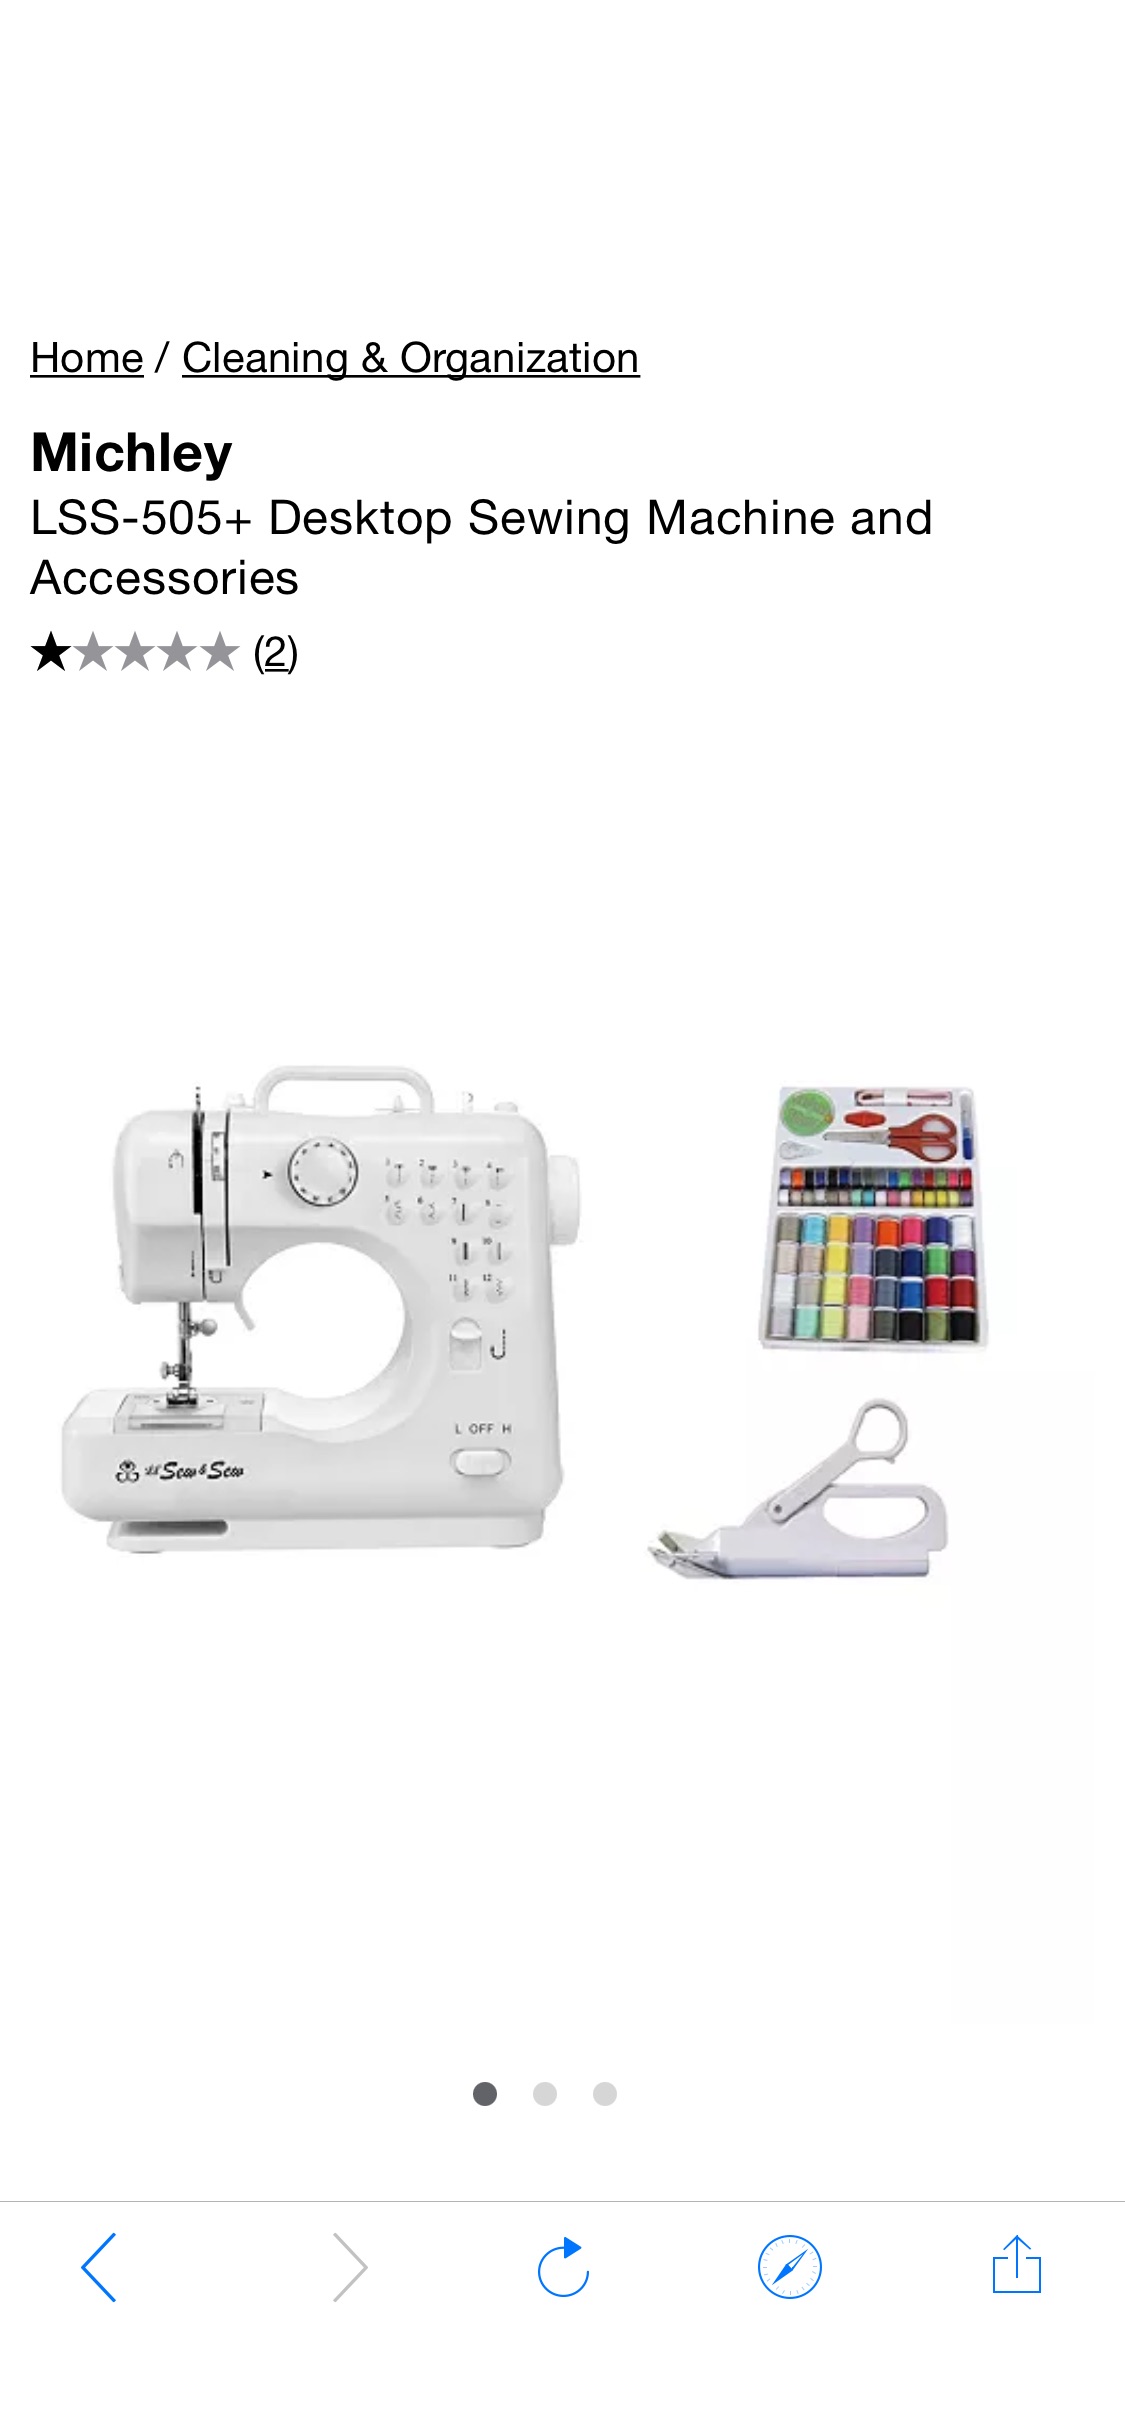 Michley LSS-505+ Desktop Sewing Machine and Accessories & Reviews - Cleaning & Organization - Home - Macy's好用有实惠质感超棒！